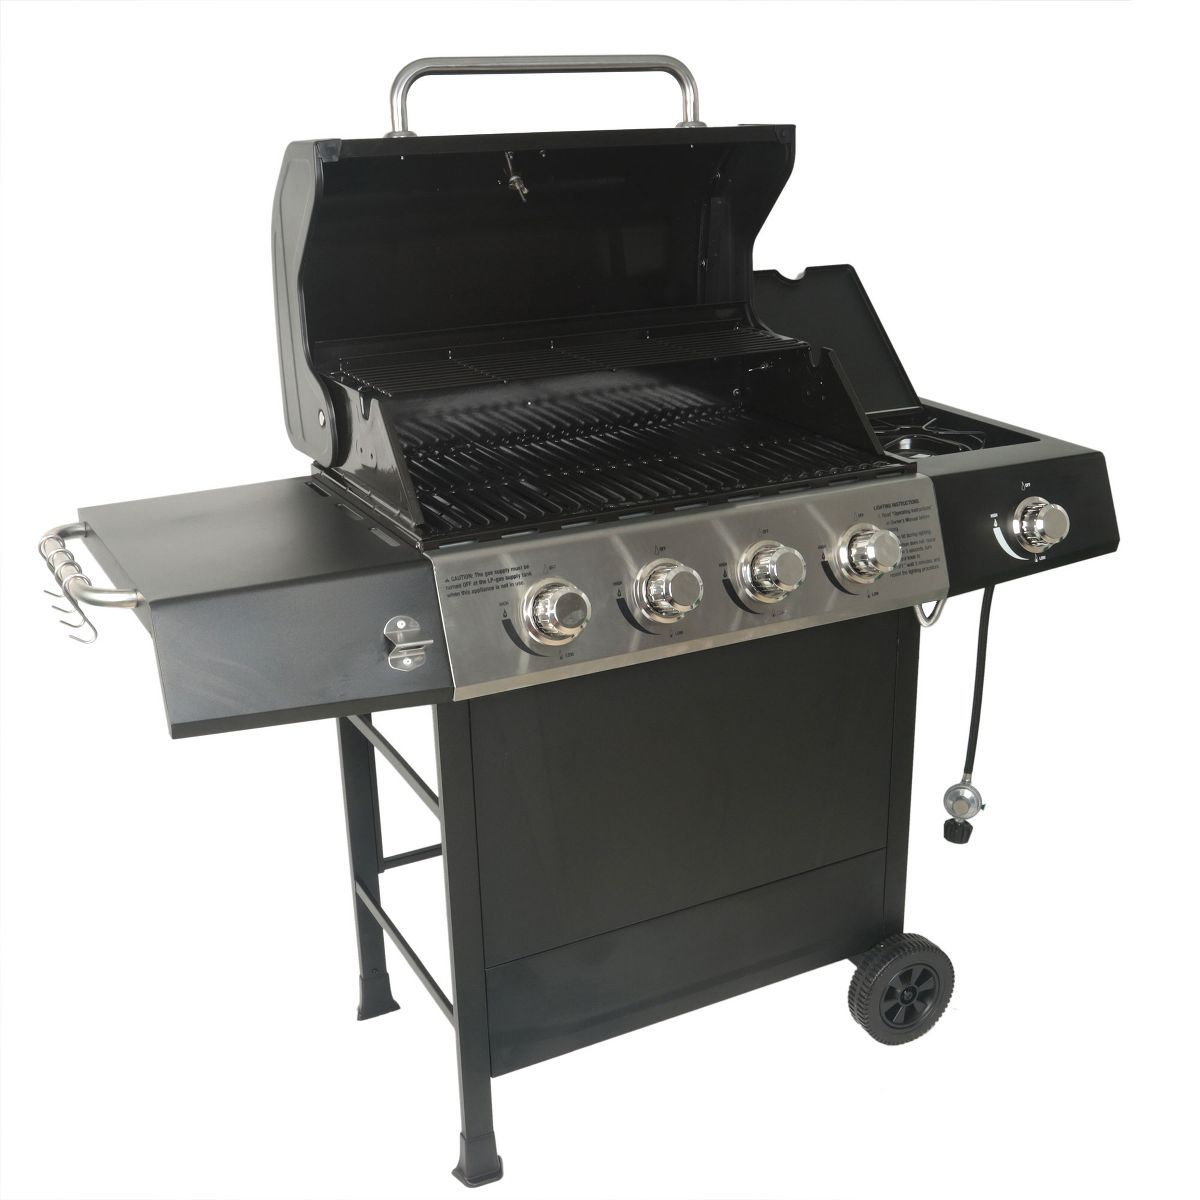 Grill Boss Outdoor BBQ Burner Propane Gas Grill for Barbecue Cooking with Side Burner, Lid, Wheel... | Target